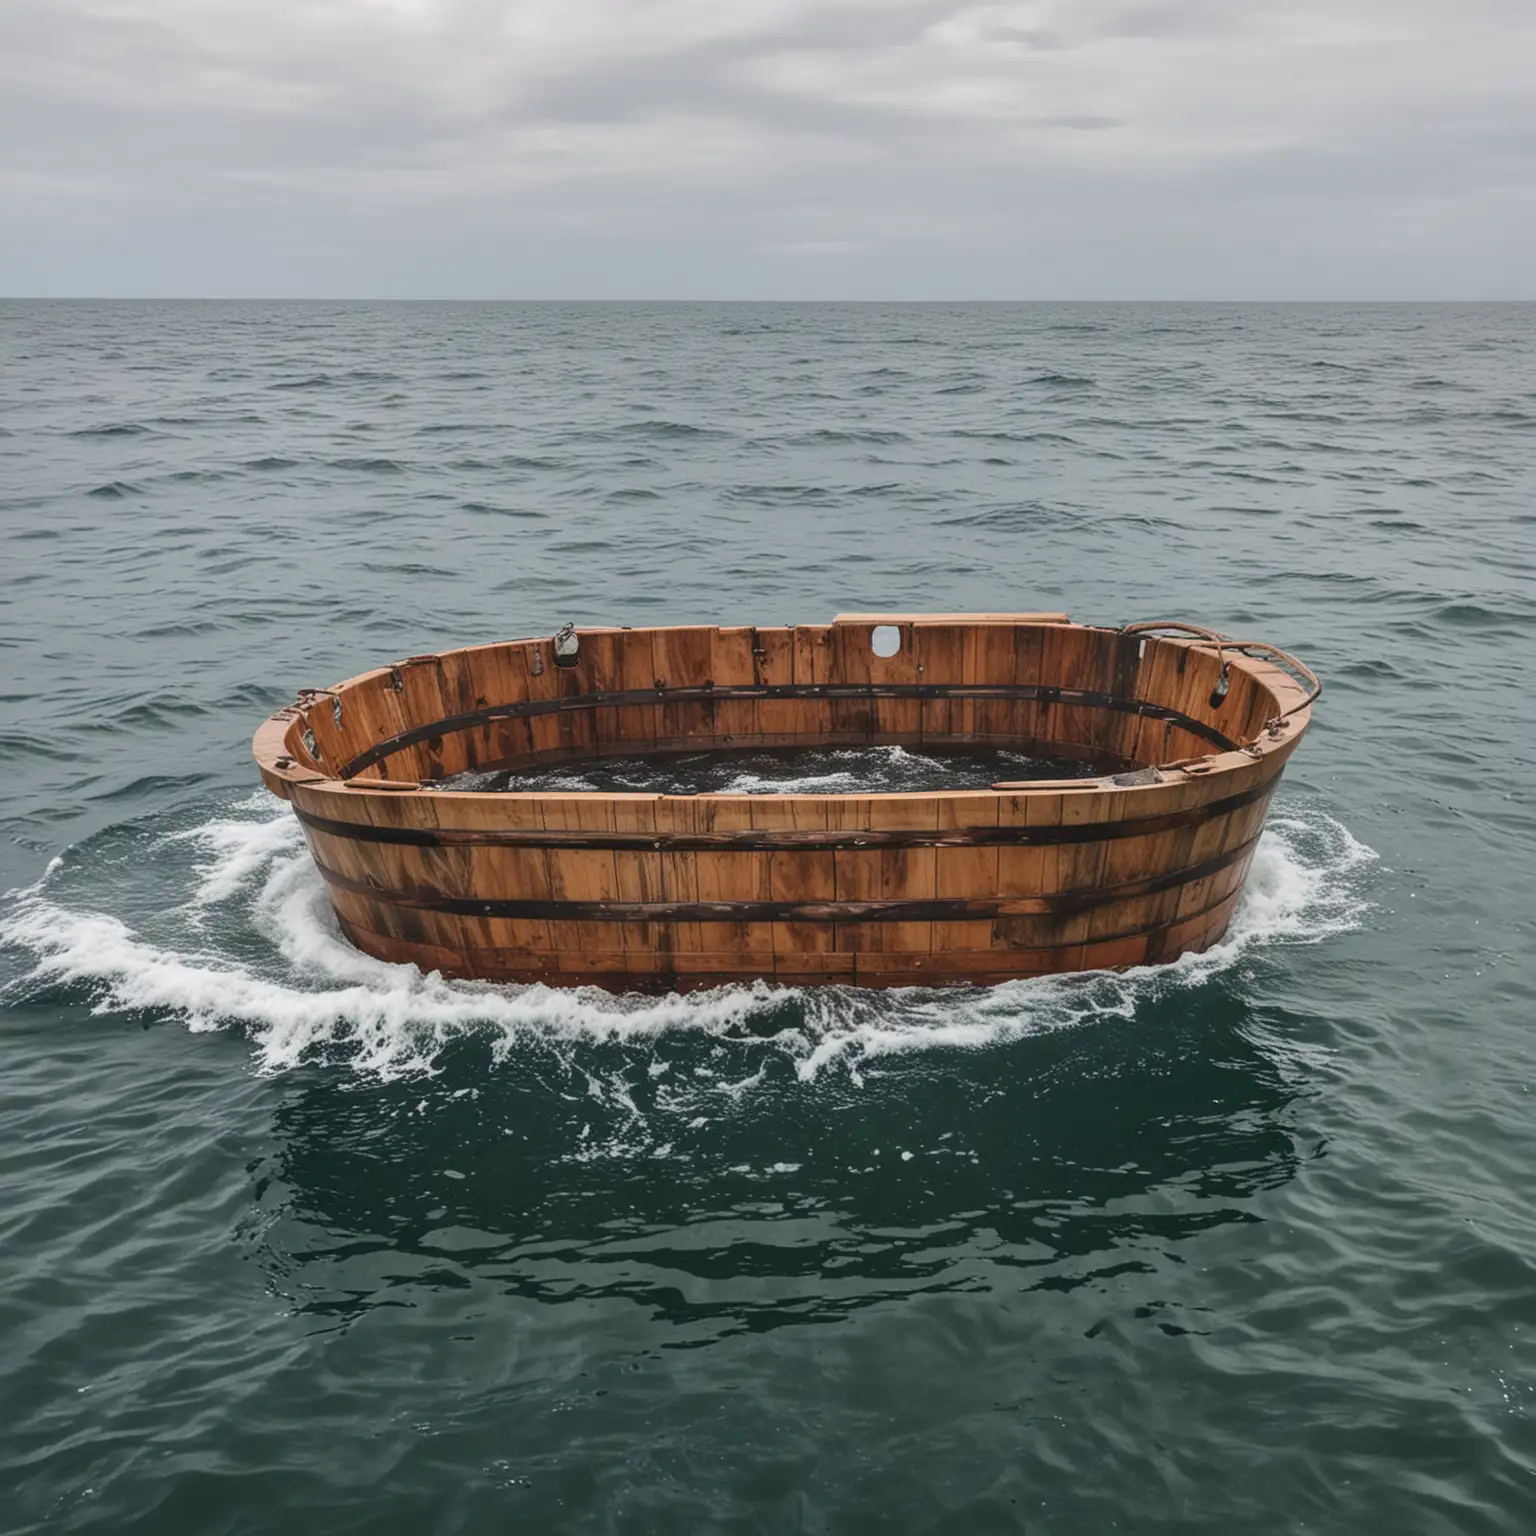 Solitary Wooden Tub Floating Adrift in the Ocean